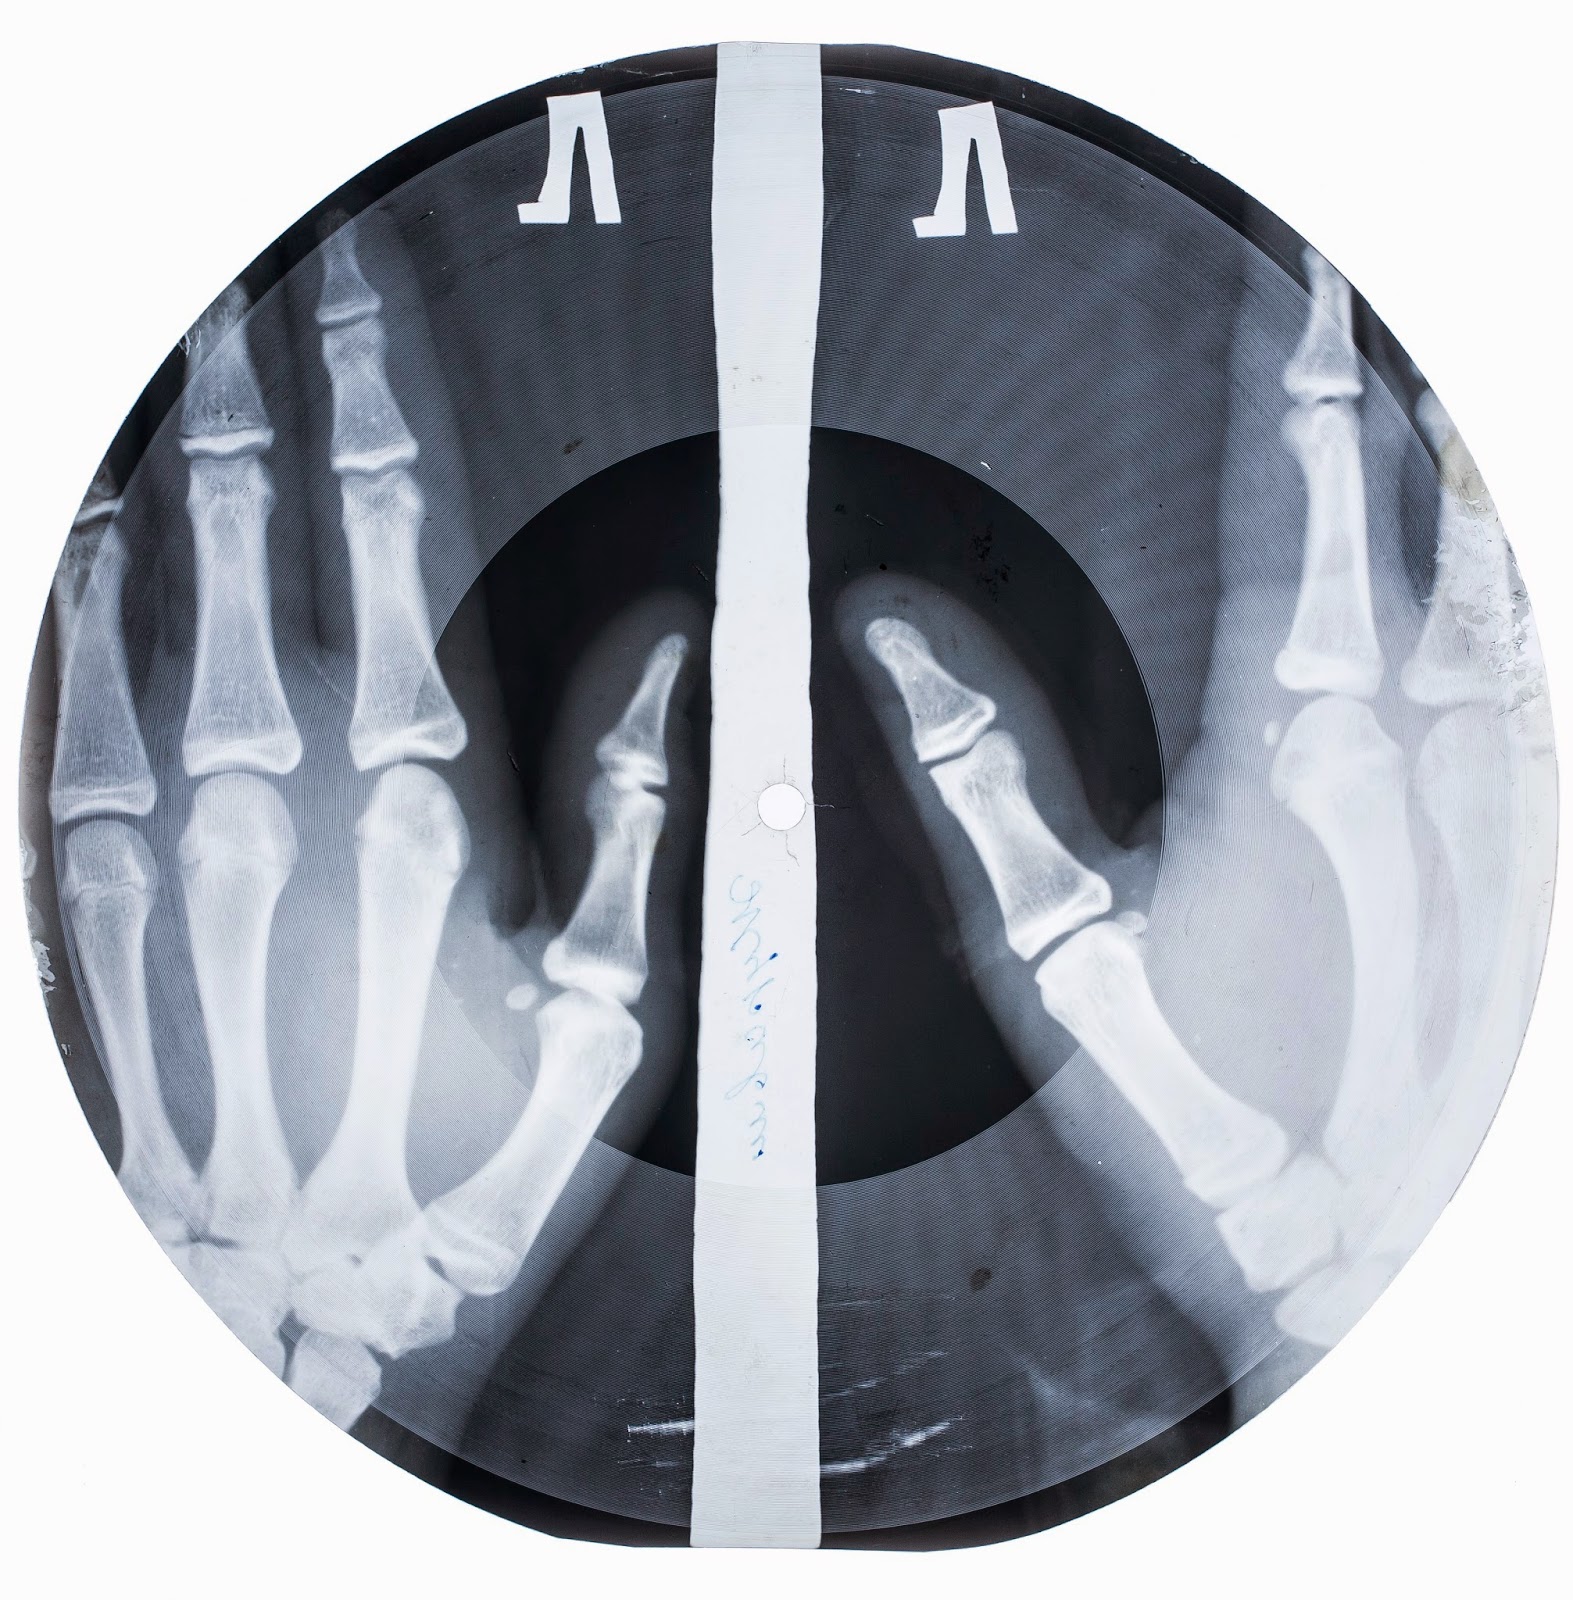 An X-Ray record, from Work and Play Behind the Iron Curtain